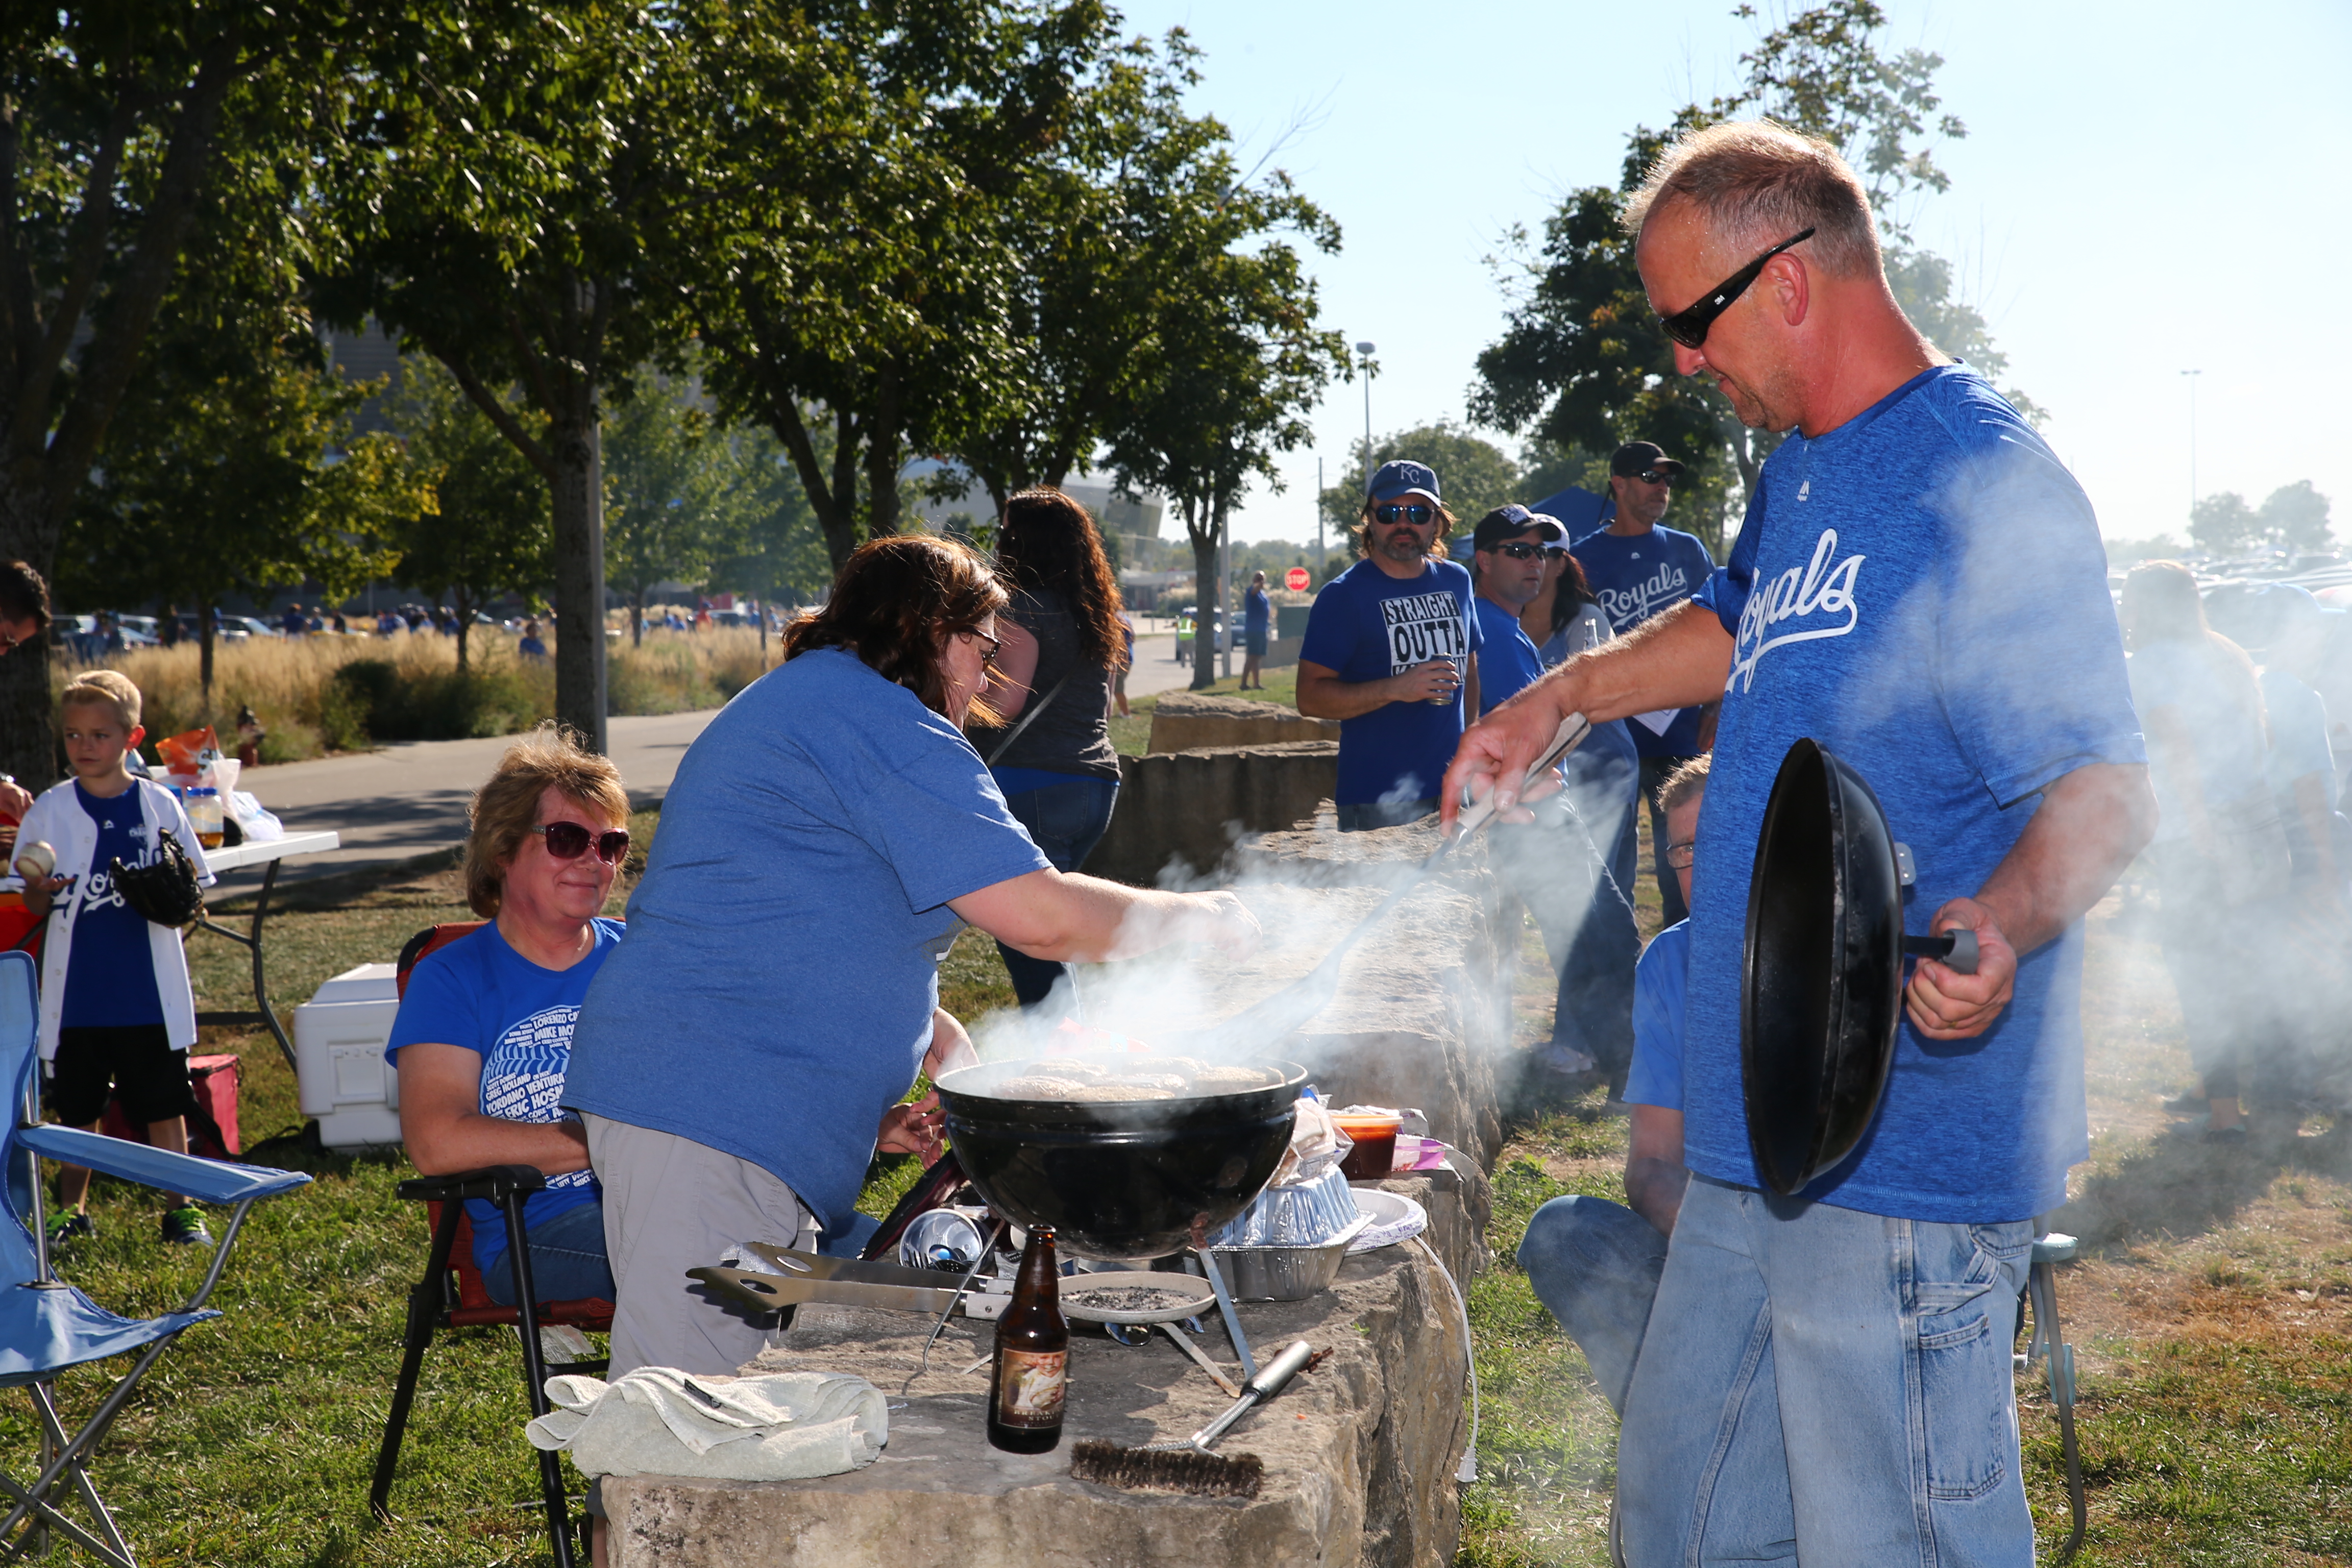 The Best Baseball Tailgating Cities royals tailgate